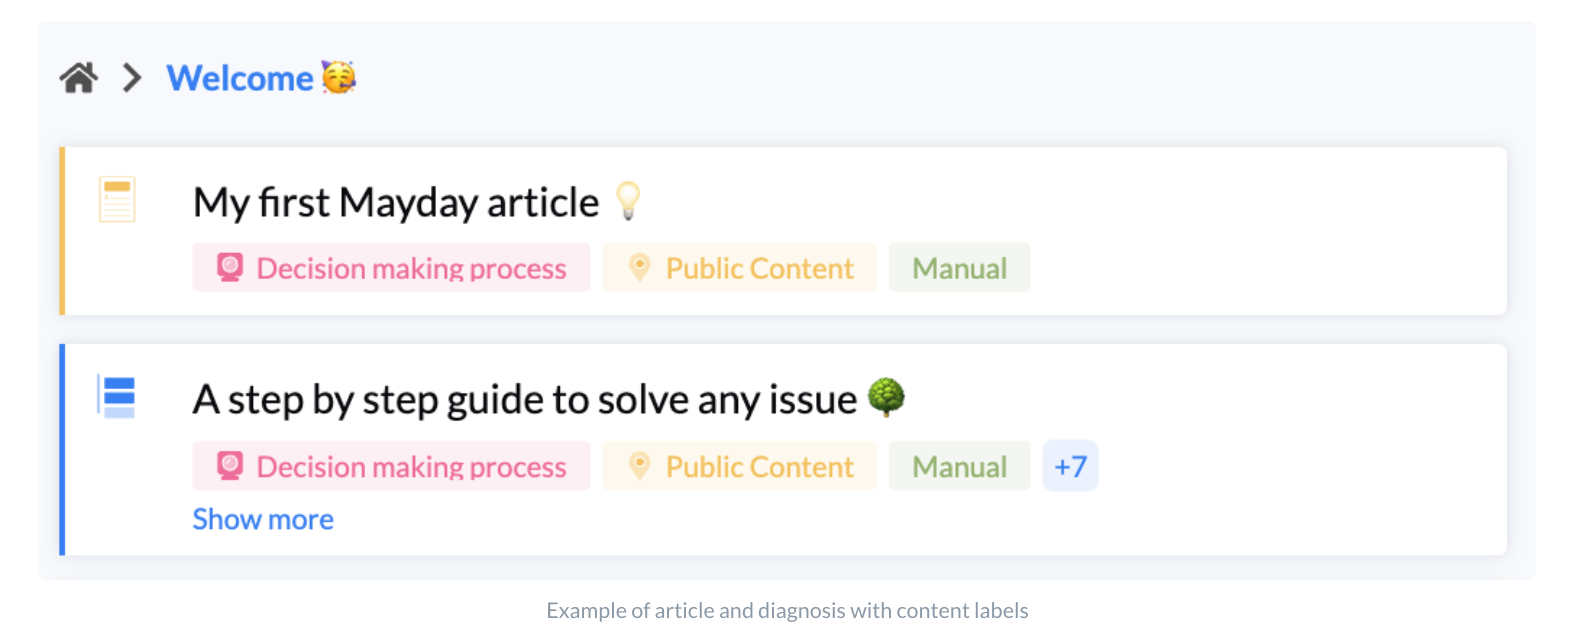 Example of article and diagnosis with content labels